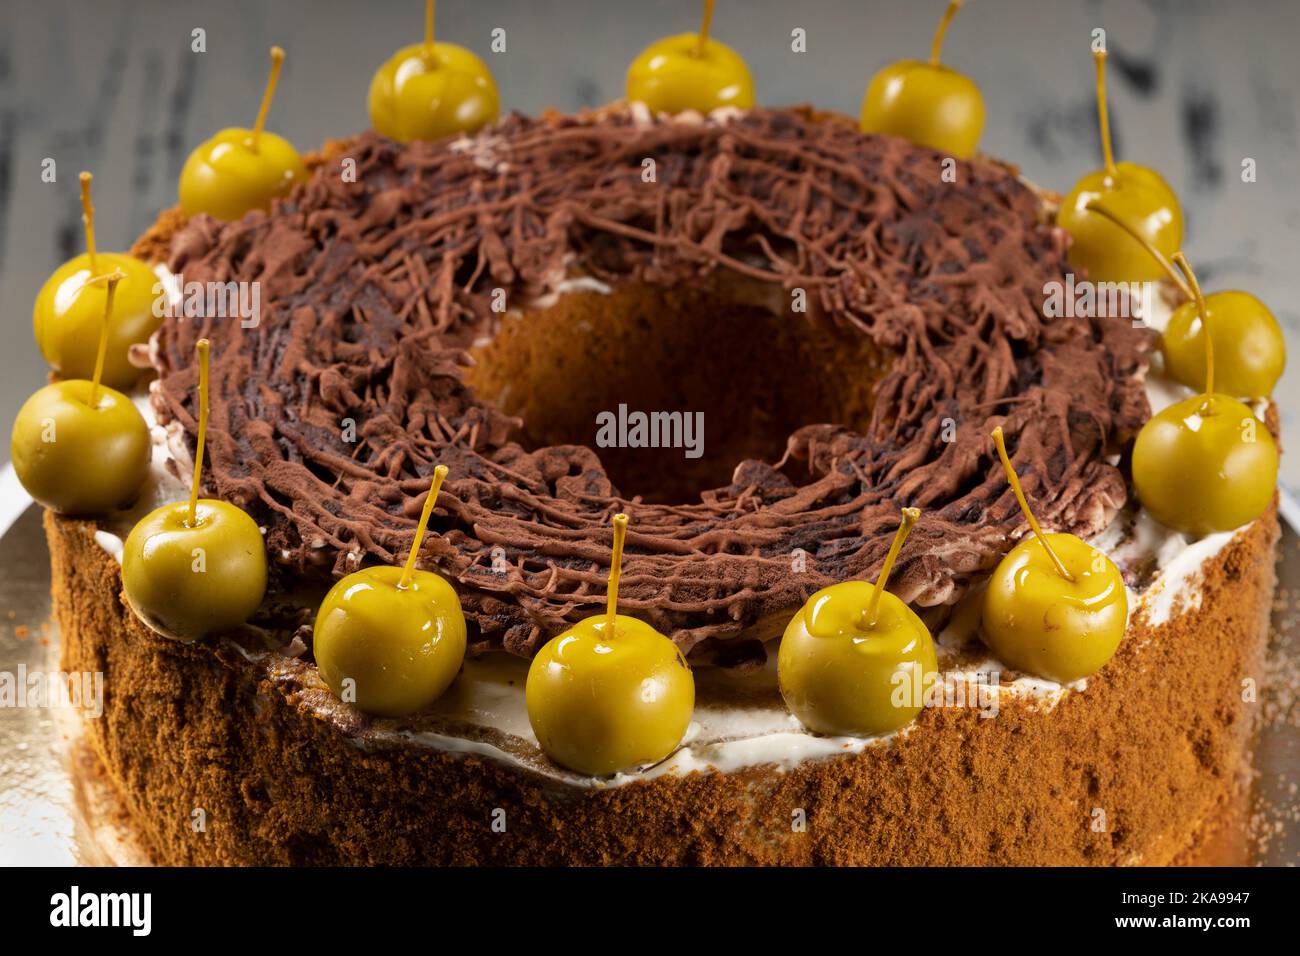 Homemade chocolate cake sweet pastry dessert with brown icing, green decorative cherries. Dark food photo, rustic style. Stock Photo